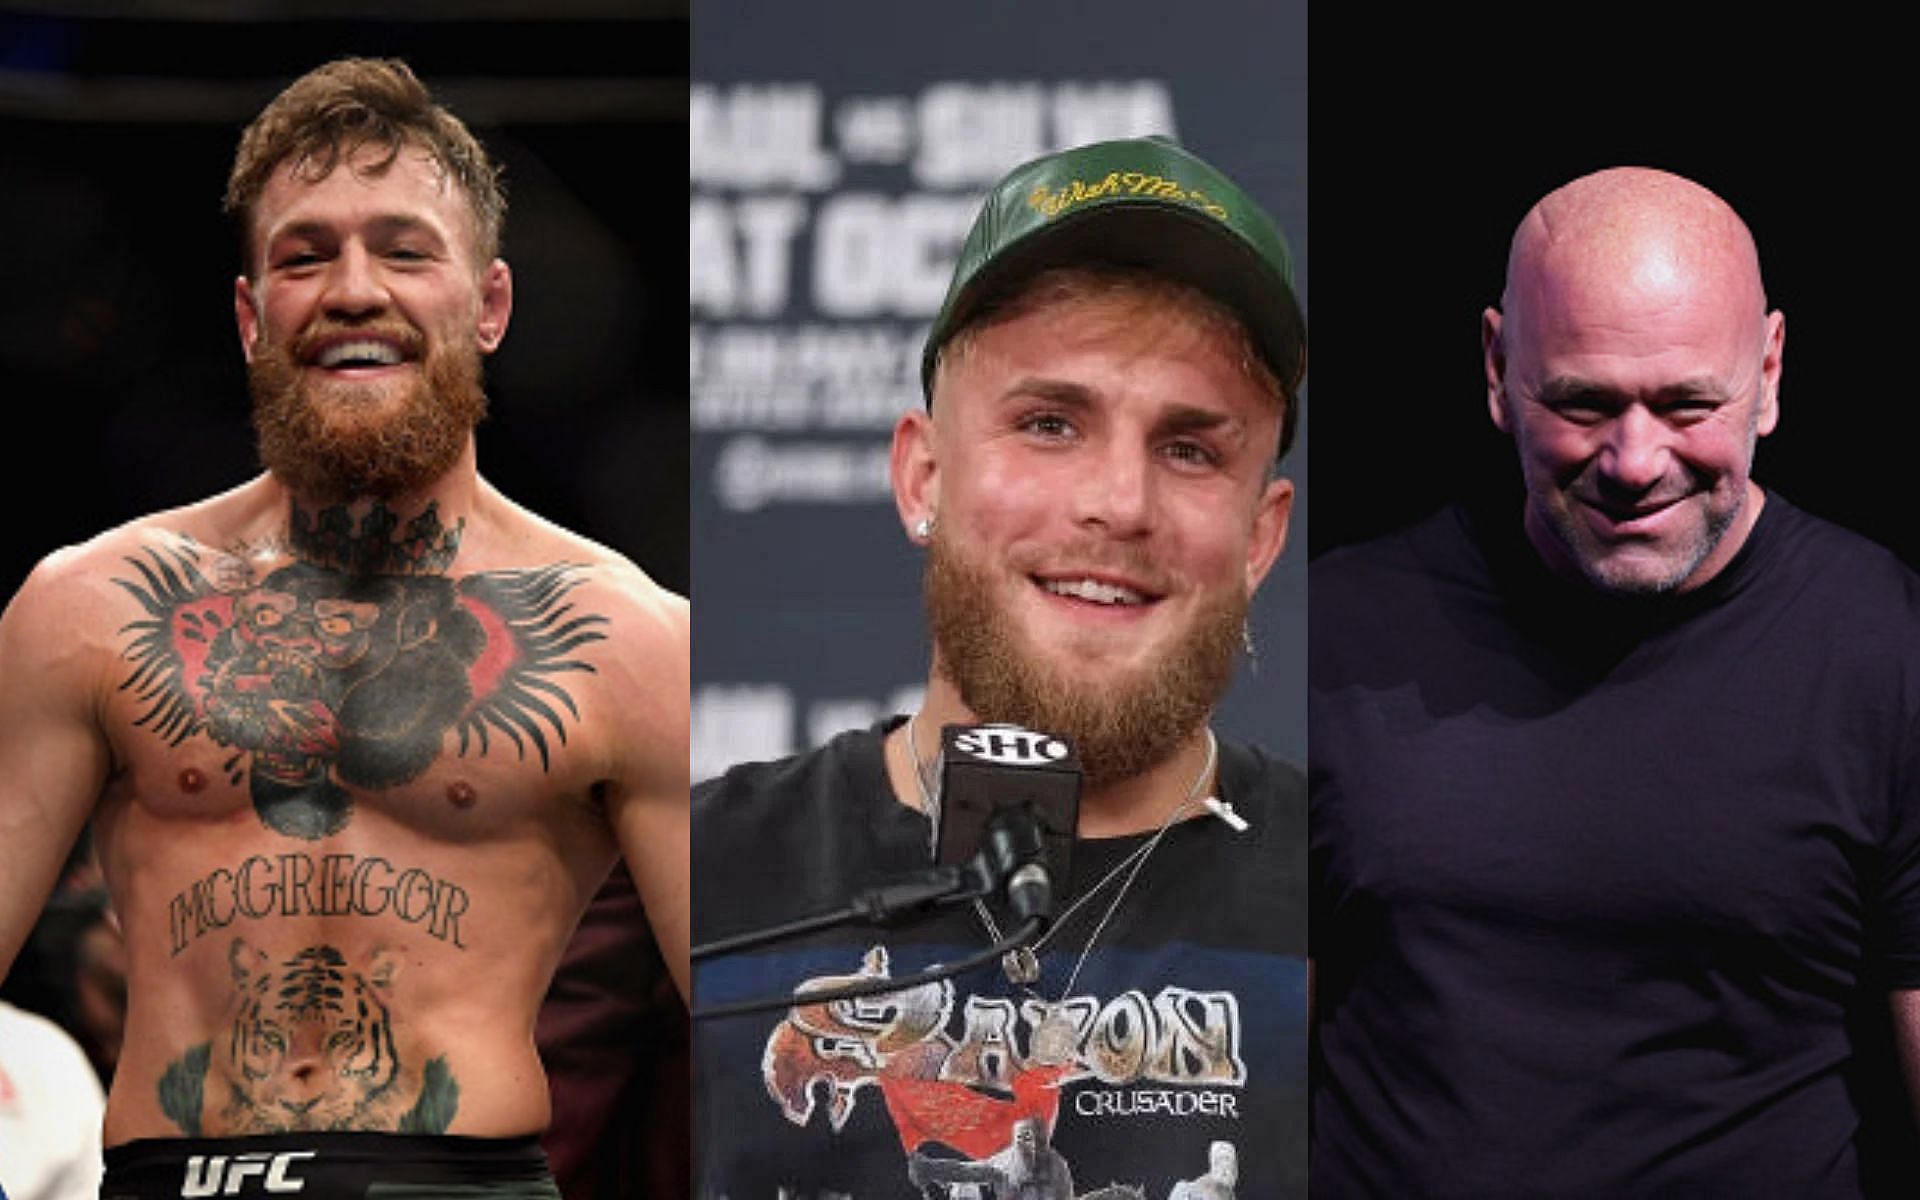 From left to right: Conor McGregor, Jake Paul, Dana White